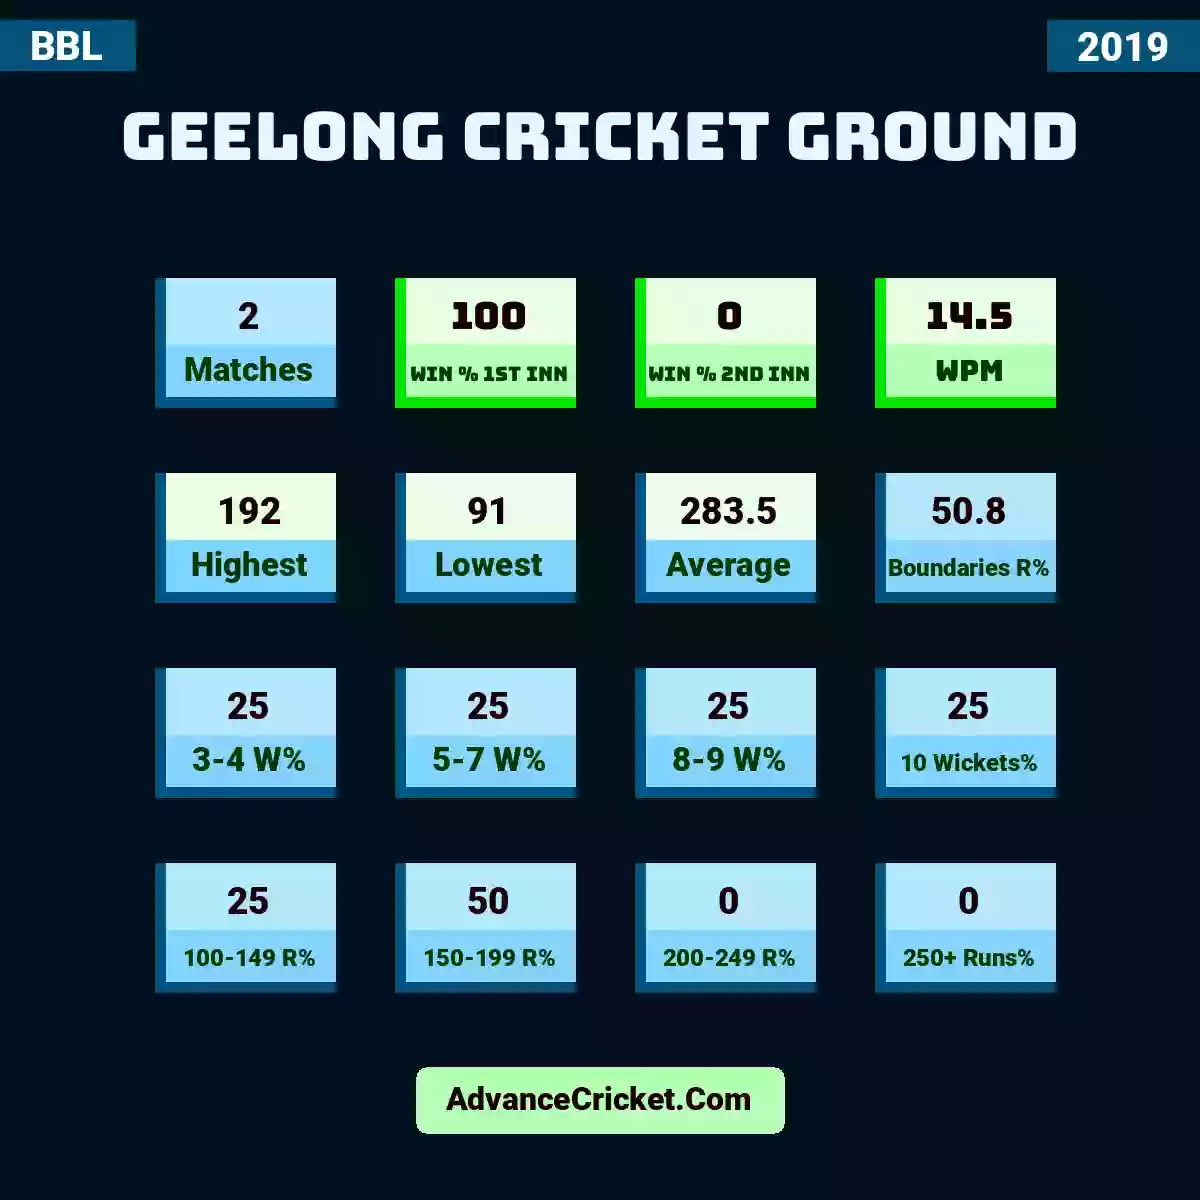 Image showing Geelong Cricket Ground with Matches: 2, Win % 1st Inn: 100, Win % 2nd Inn: 0, WPM: 14.5, Highest: 192, Lowest: 91, Average: 283.5, Boundaries R%: 50.8, 3-4 W%: 25, 5-7 W%: 25, 8-9 W%: 25, 10 Wickets%: 25, 100-149 R%: 25, 150-199 R%: 50, 200-249 R%: 0, 250+ Runs%: 0.